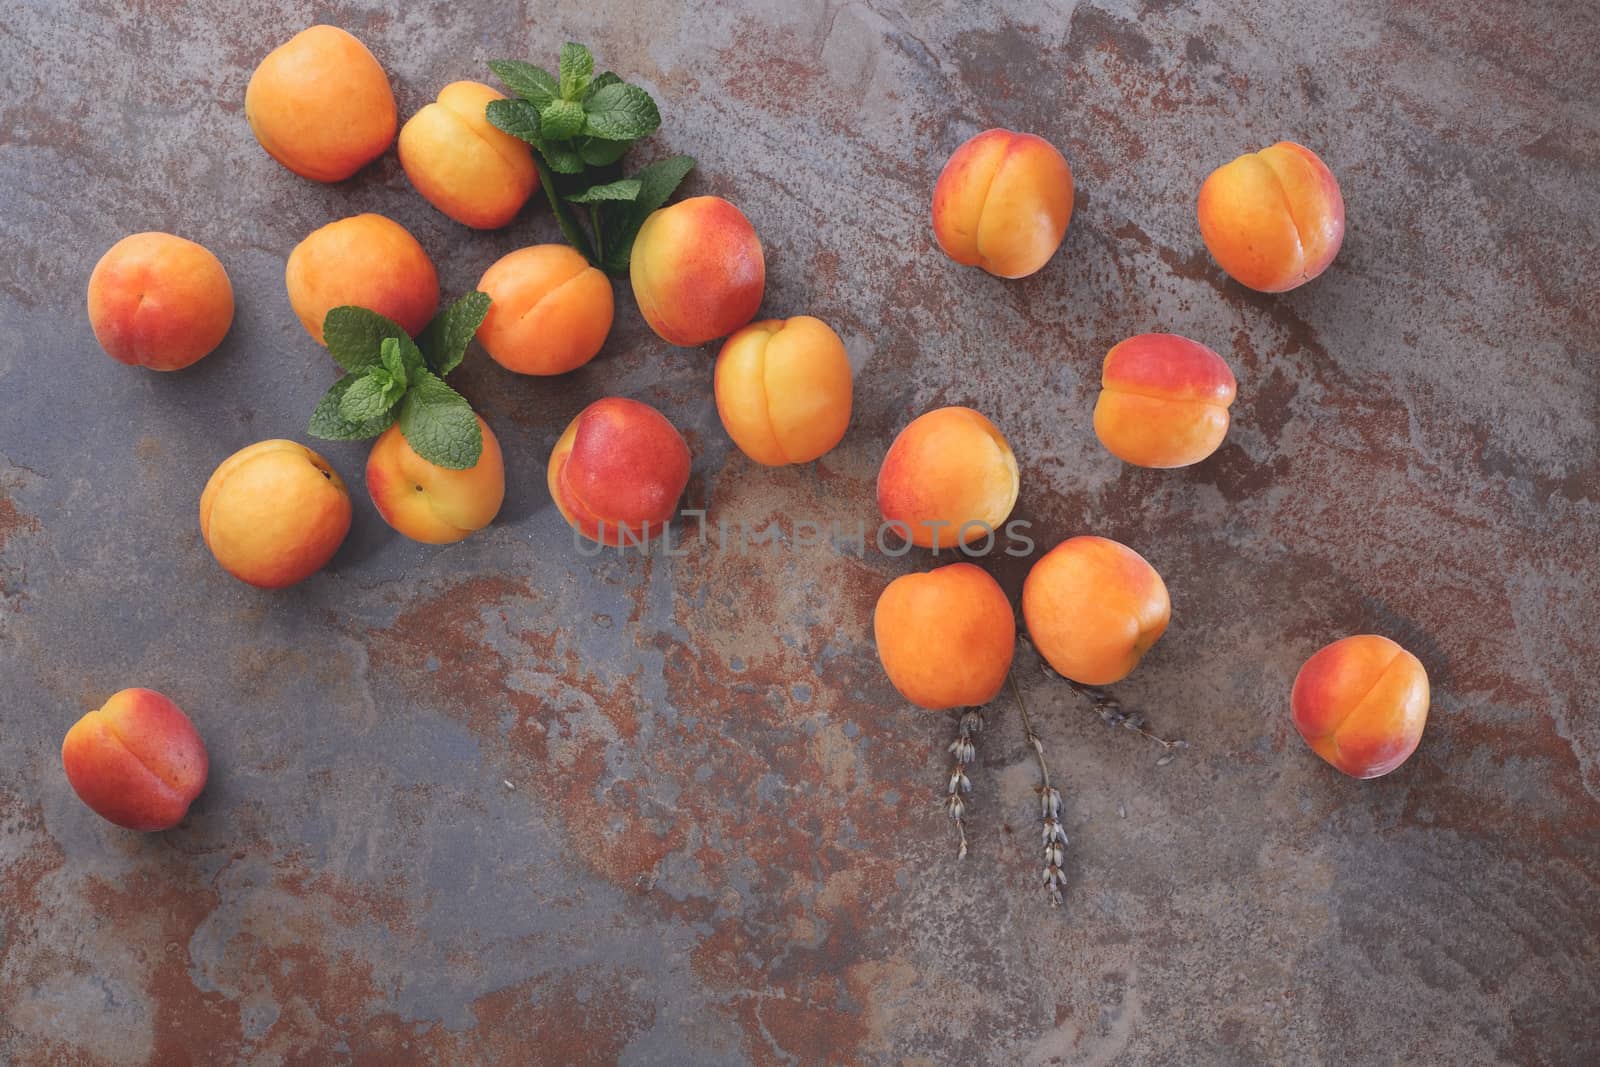 Still life of fresh apricots on a rustic stone surface, top view, rustic style. Natural light